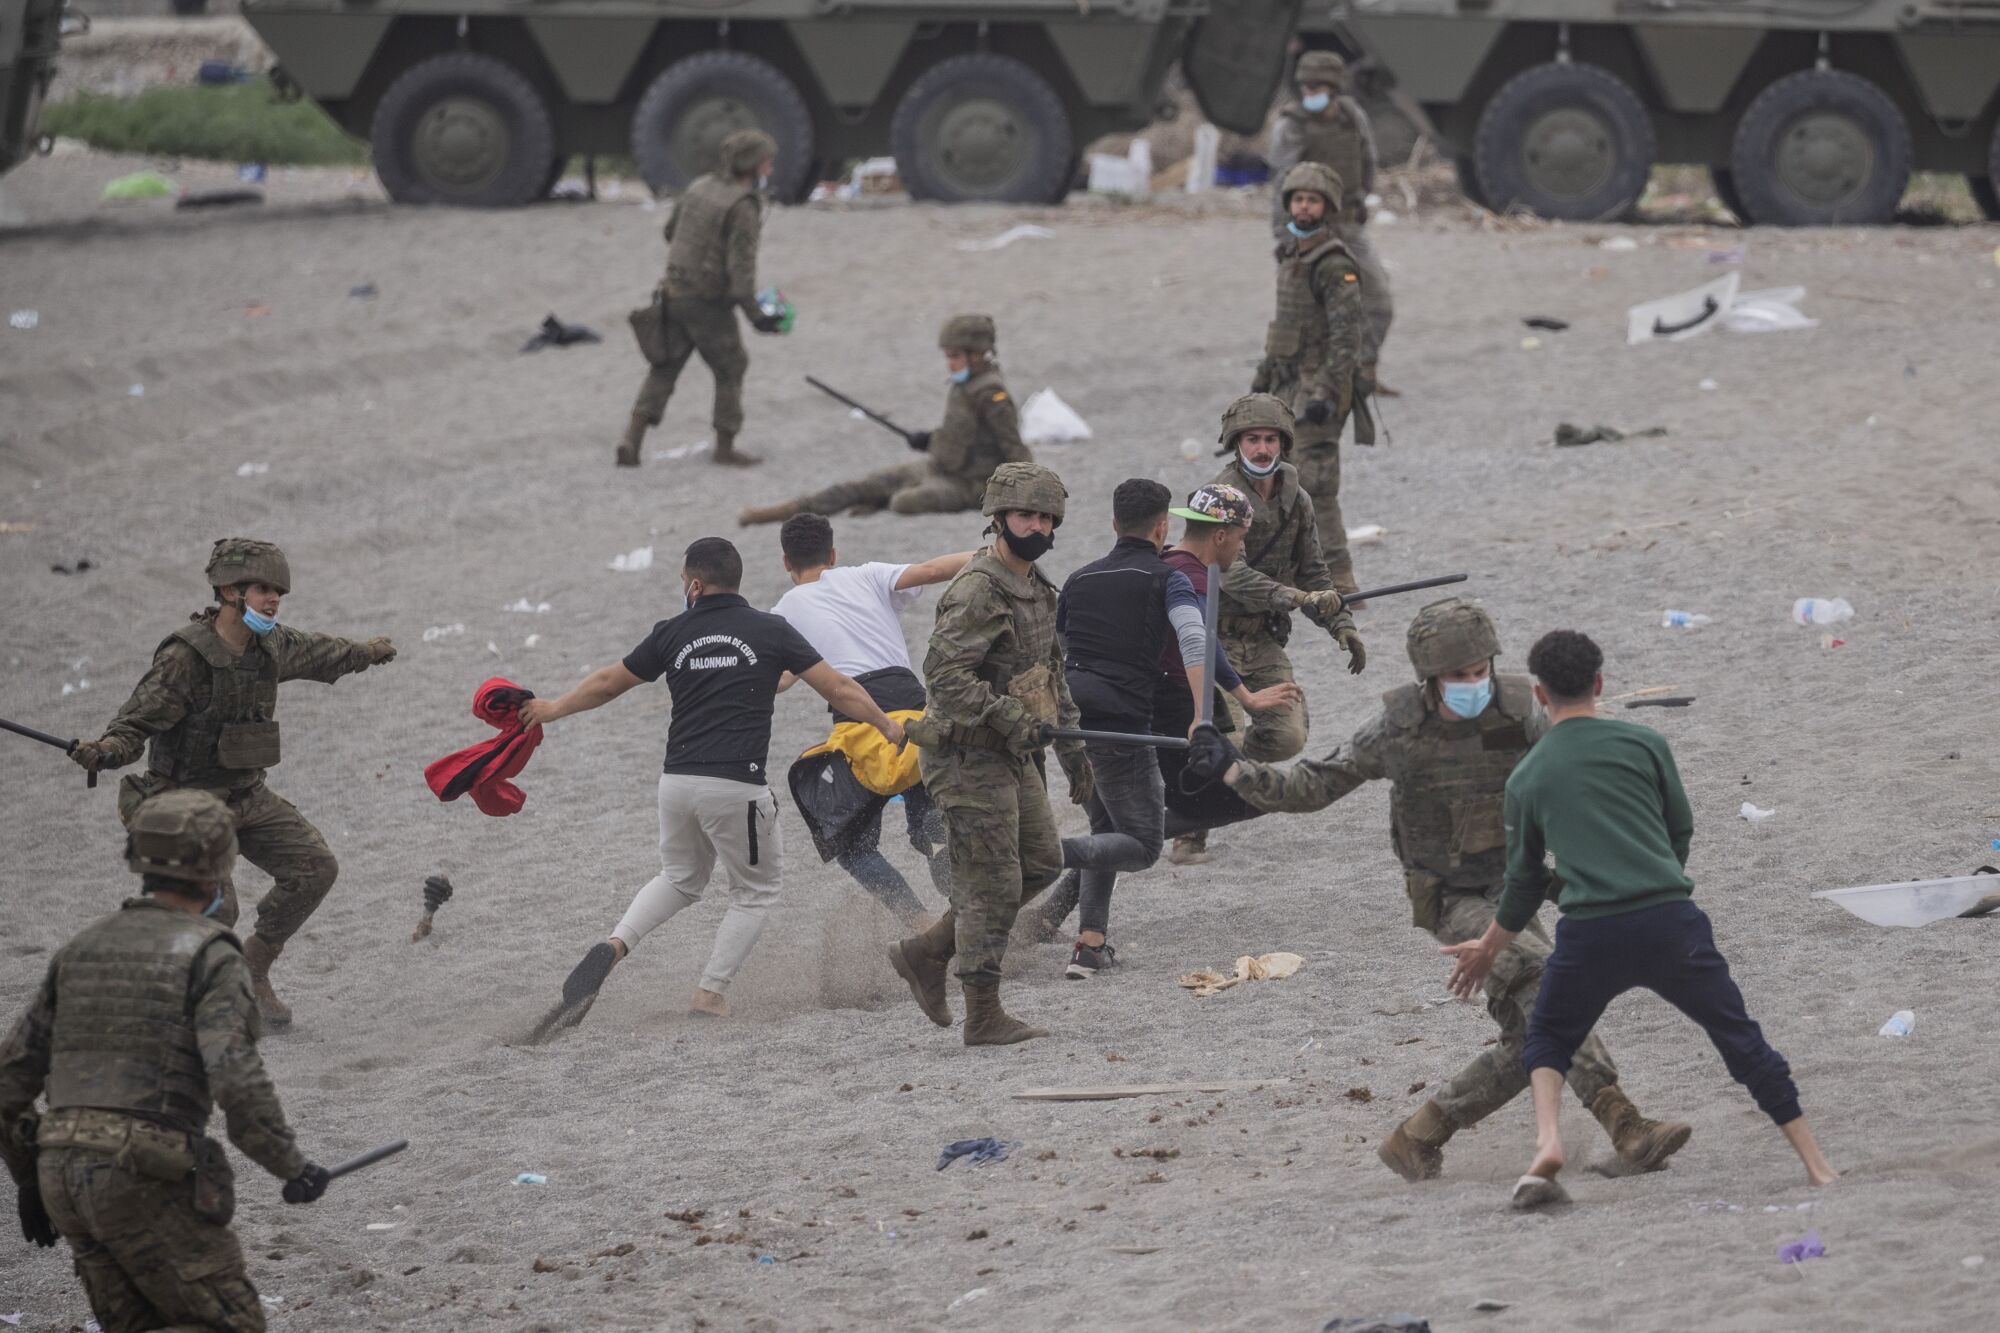 A group of soldiers fight with batons against five young male migrants on a beach